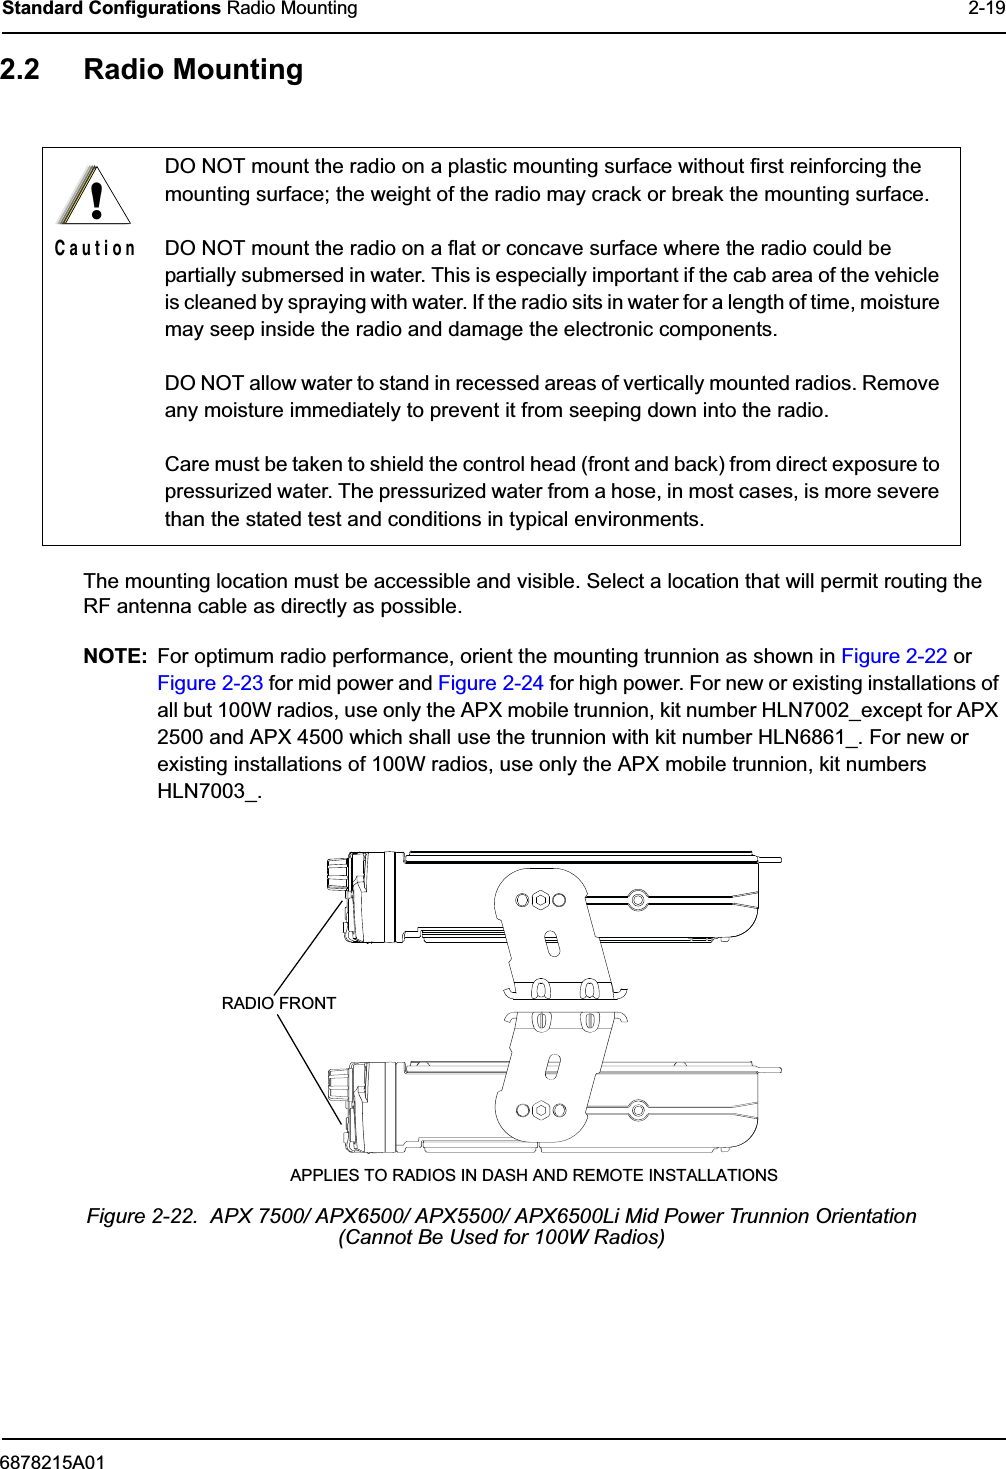 6878215A01Standard Configurations Radio Mounting 2-192.2 Radio MountingThe mounting location must be accessible and visible. Select a location that will permit routing the RF antenna cable as directly as possible.NOTE: For optimum radio performance, orient the mounting trunnion as shown in Figure 2-22 or Figure 2-23 for mid power and Figure 2-24 for high power. For new or existing installations of all but 100W radios, use only the APX mobile trunnion, kit number HLN7002_except for APX 2500 and APX 4500 which shall use the trunnion with kit number HLN6861_. For new or existing installations of 100W radios, use only the APX mobile trunnion, kit numbers HLN7003_.Figure 2-22.  APX 7500/ APX6500/ APX5500/ APX6500Li Mid Power Trunnion Orientation (Cannot Be Used for 100W Radios)DO NOT mount the radio on a plastic mounting surface without first reinforcing the mounting surface; the weight of the radio may crack or break the mounting surface.DO NOT mount the radio on a flat or concave surface where the radio could be partially submersed in water. This is especially important if the cab area of the vehicle is cleaned by spraying with water. If the radio sits in water for a length of time, moisture may seep inside the radio and damage the electronic components.DO NOT allow water to stand in recessed areas of vertically mounted radios. Remove any moisture immediately to prevent it from seeping down into the radio.Care must be taken to shield the control head (front and back) from direct exposure to pressurized water. The pressurized water from a hose, in most cases, is more severe than the stated test and conditions in typical environments.!C a u t i o nRADIO FRONTAPPLIES TO RADIOS IN DASH AND REMOTE INSTALLATIONS